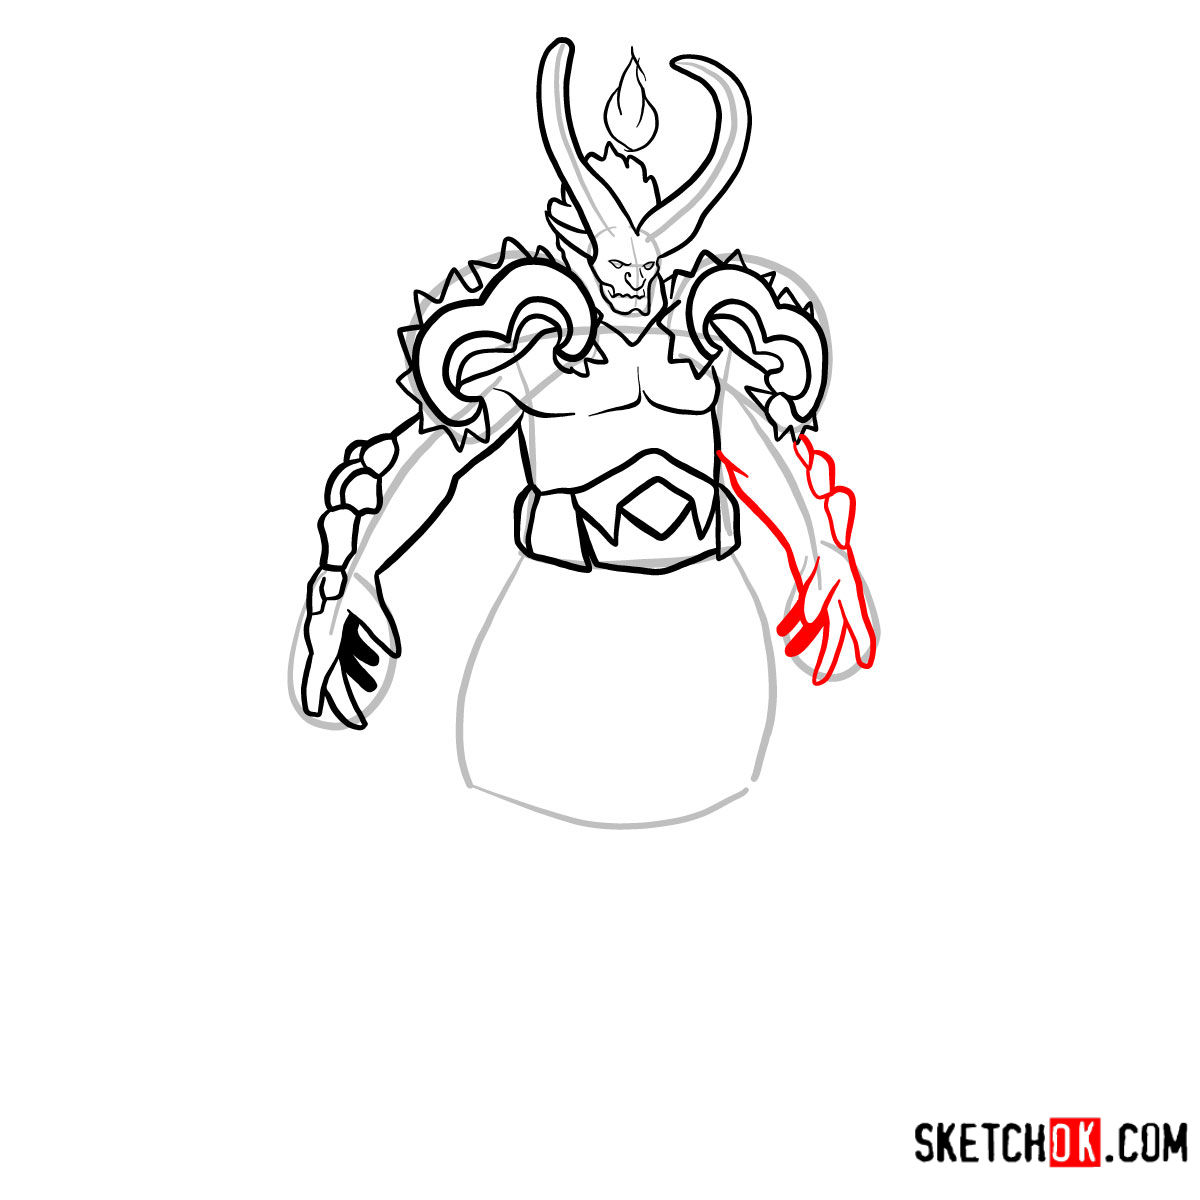 How to draw Sargeras | World of Warcraft - step 10